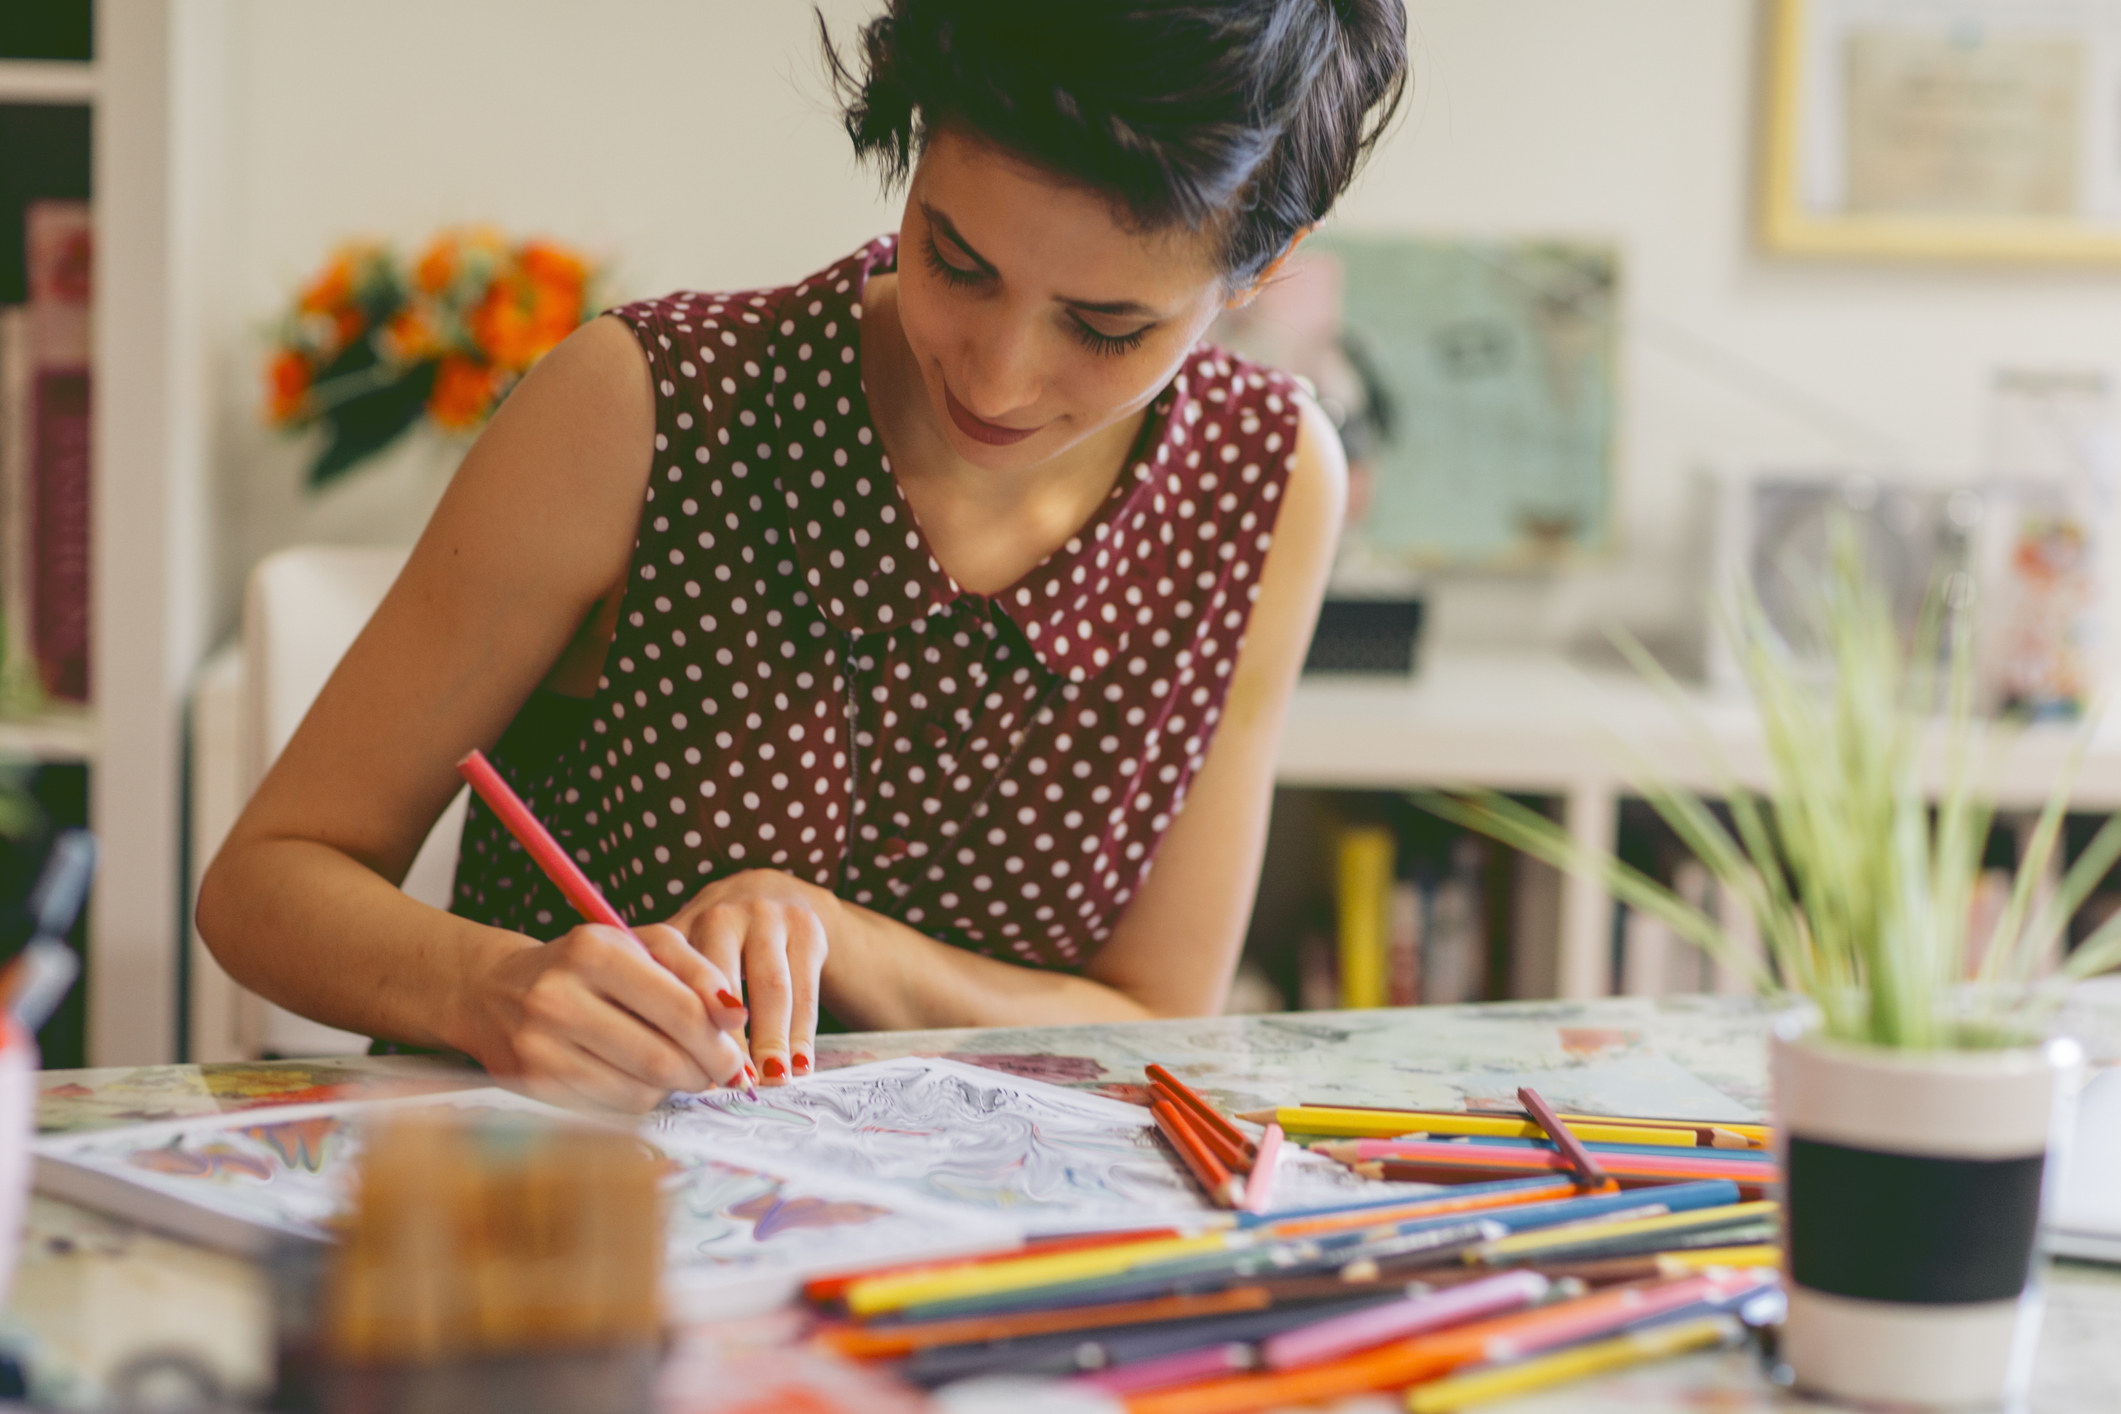 A woman uses colored pencils in a coloring book